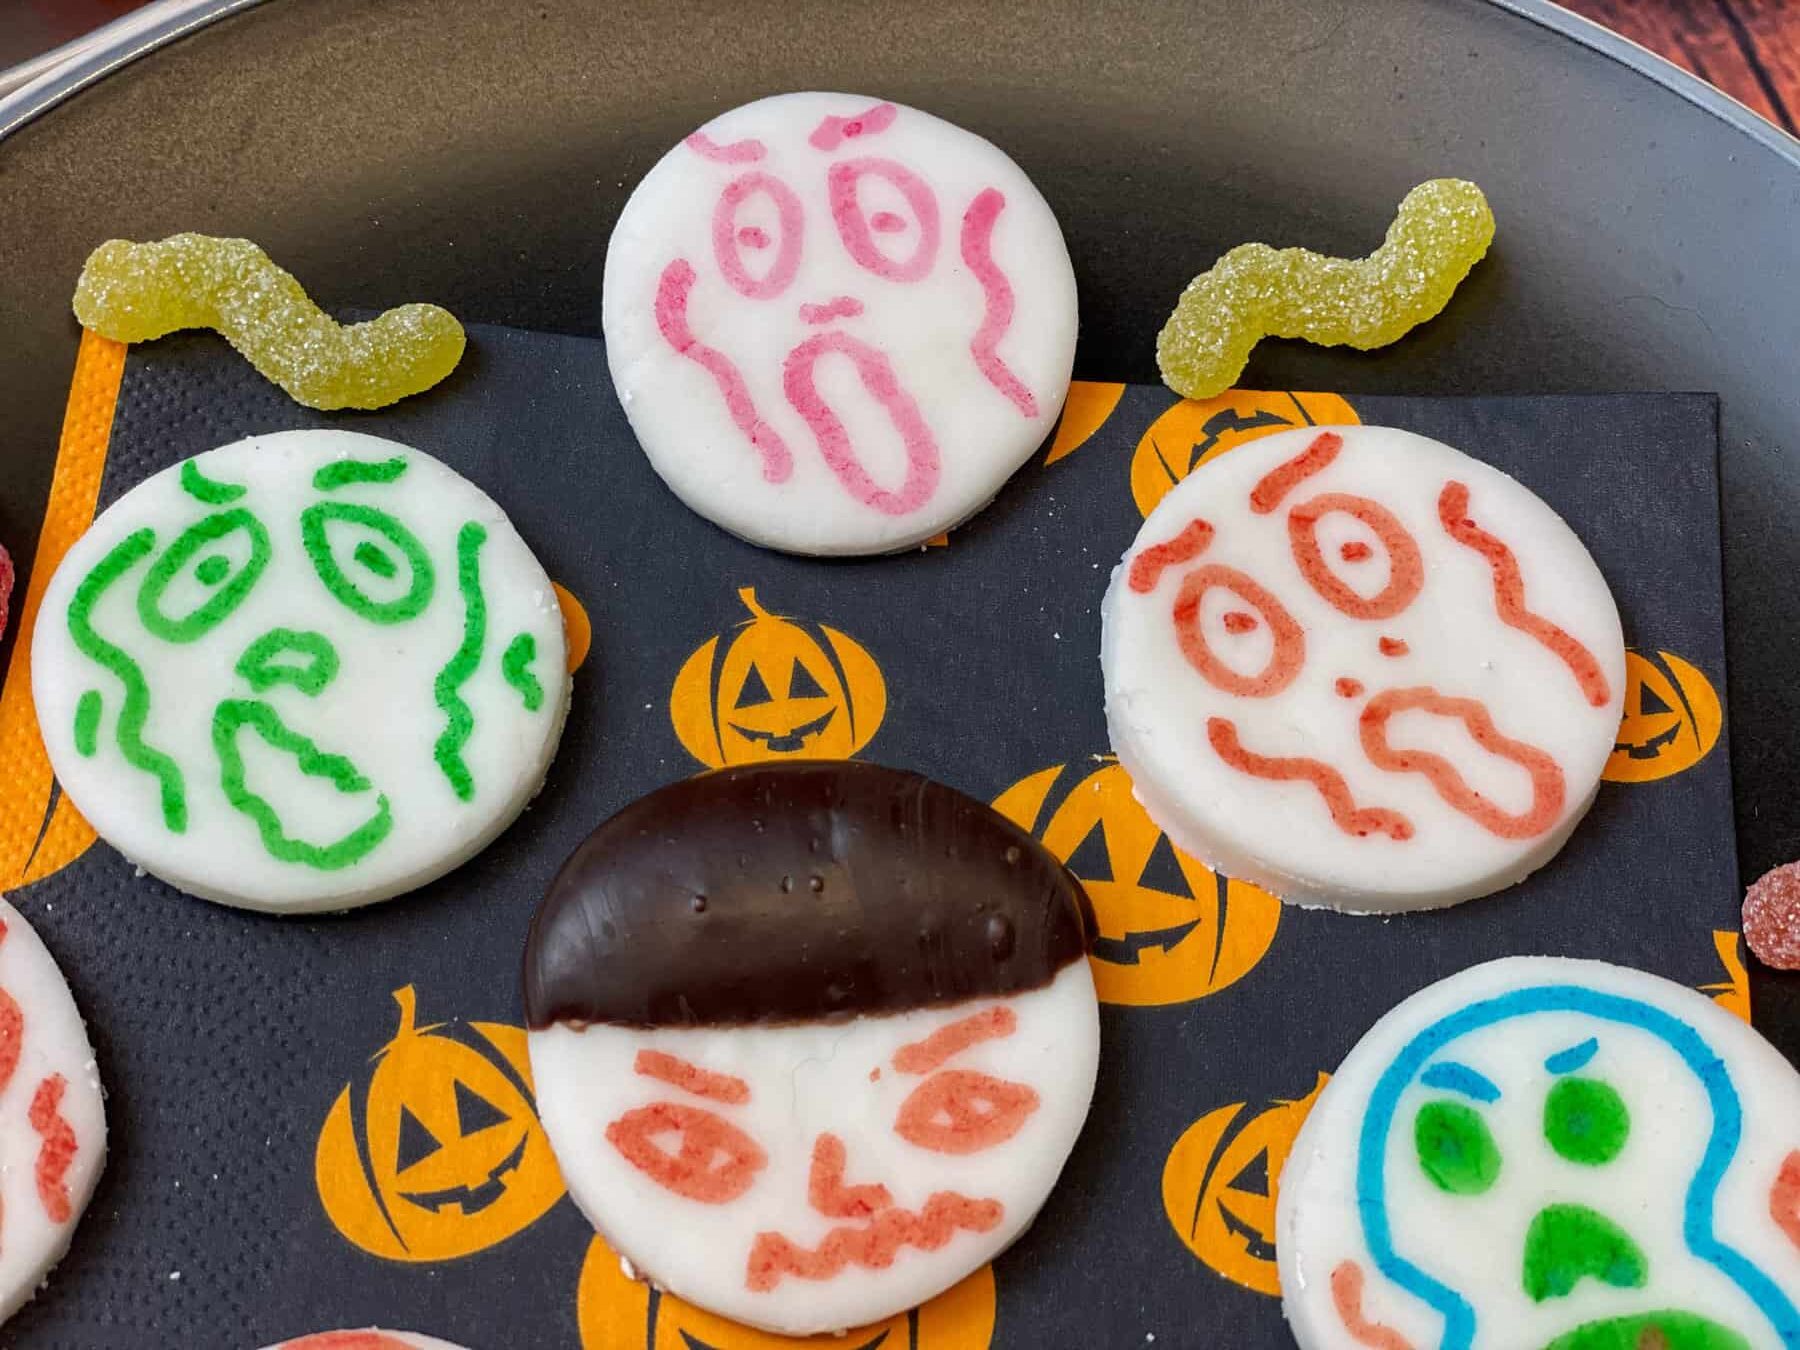 Close up of decorated scary faces on vegan peppermint creams.